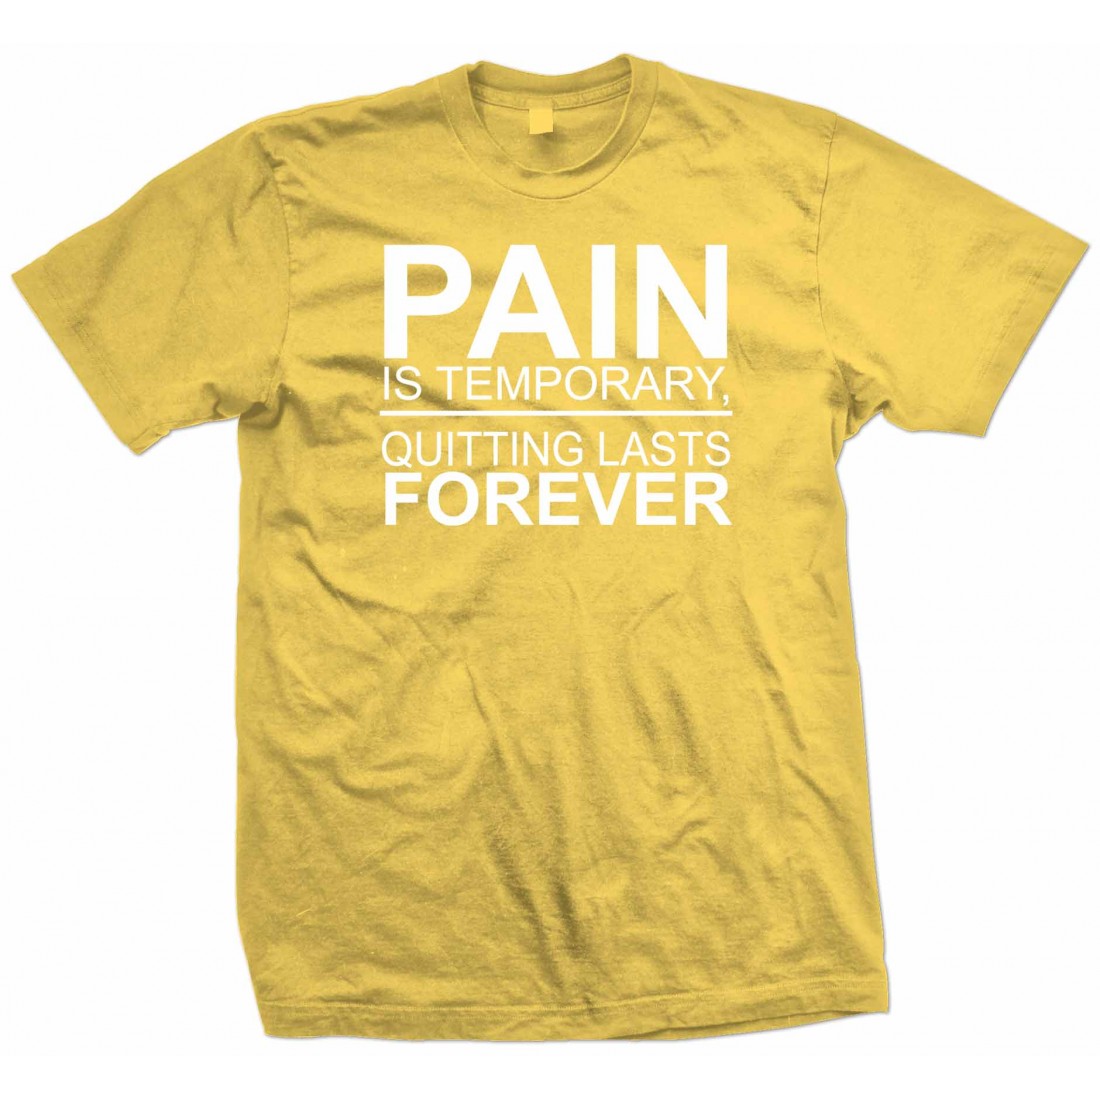 Pain is Temporary, Quitting Lasts Forever T Shirt - ZN6 Explicit Clothing™